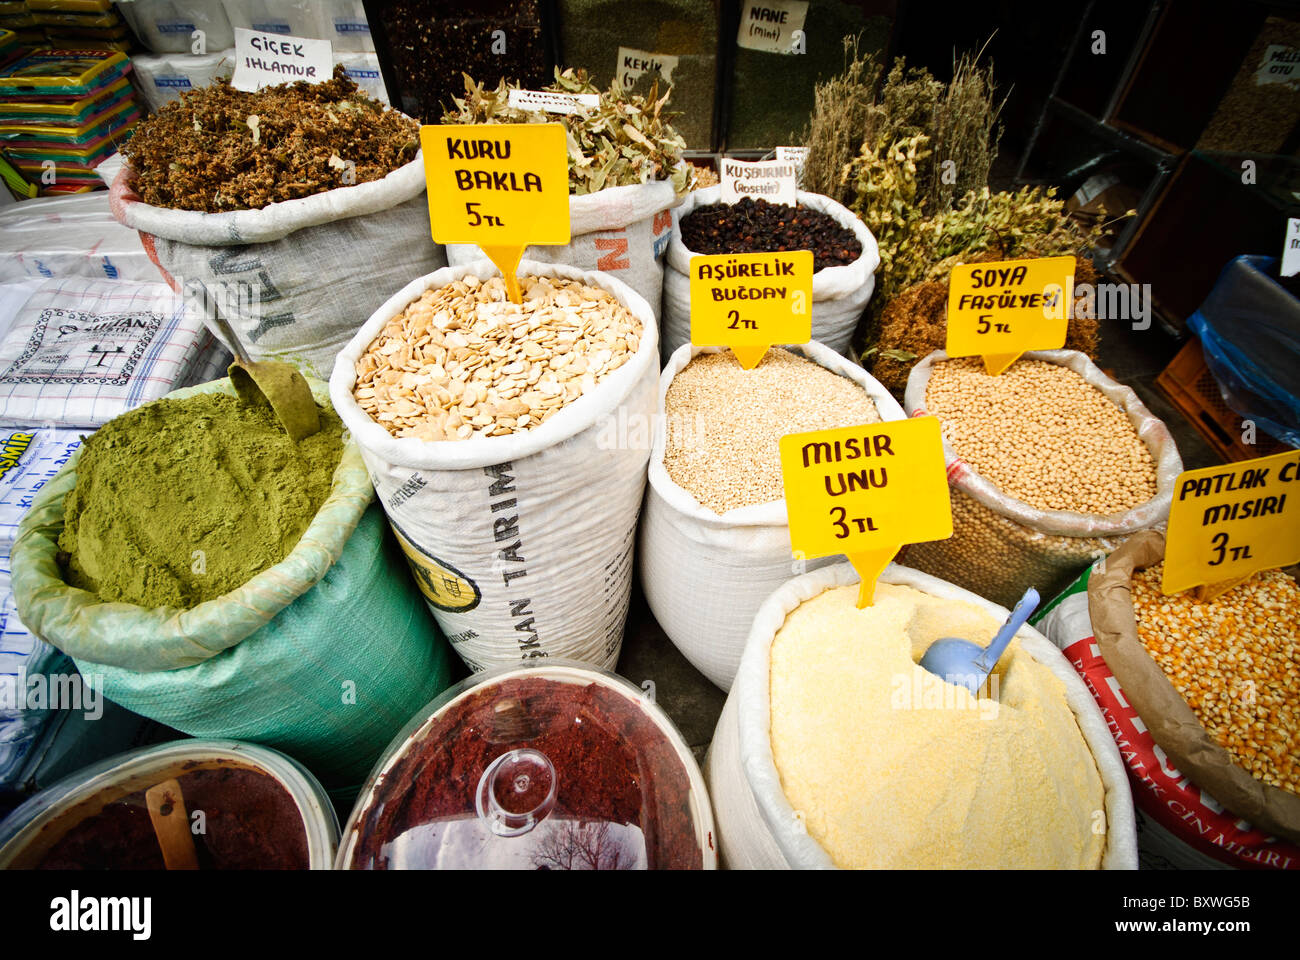 A range of spices available for sale next to the famous Spice Bazaar (also known as the Egyption Bazaar) in Istanbul, Turkey. Stock Photo